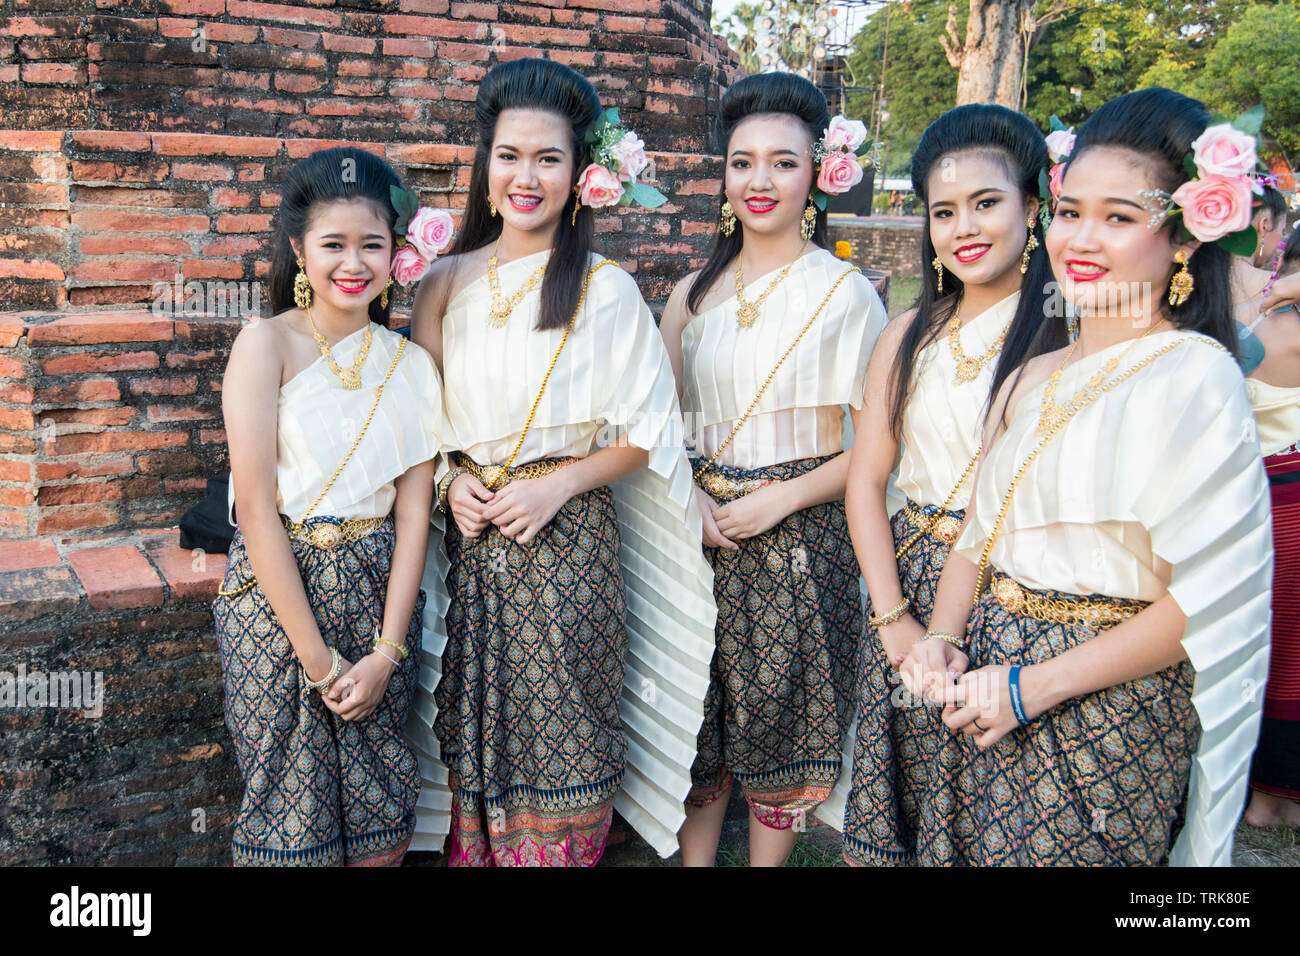 traditional dresst thai people at the Loy Krathong Festival in the ...